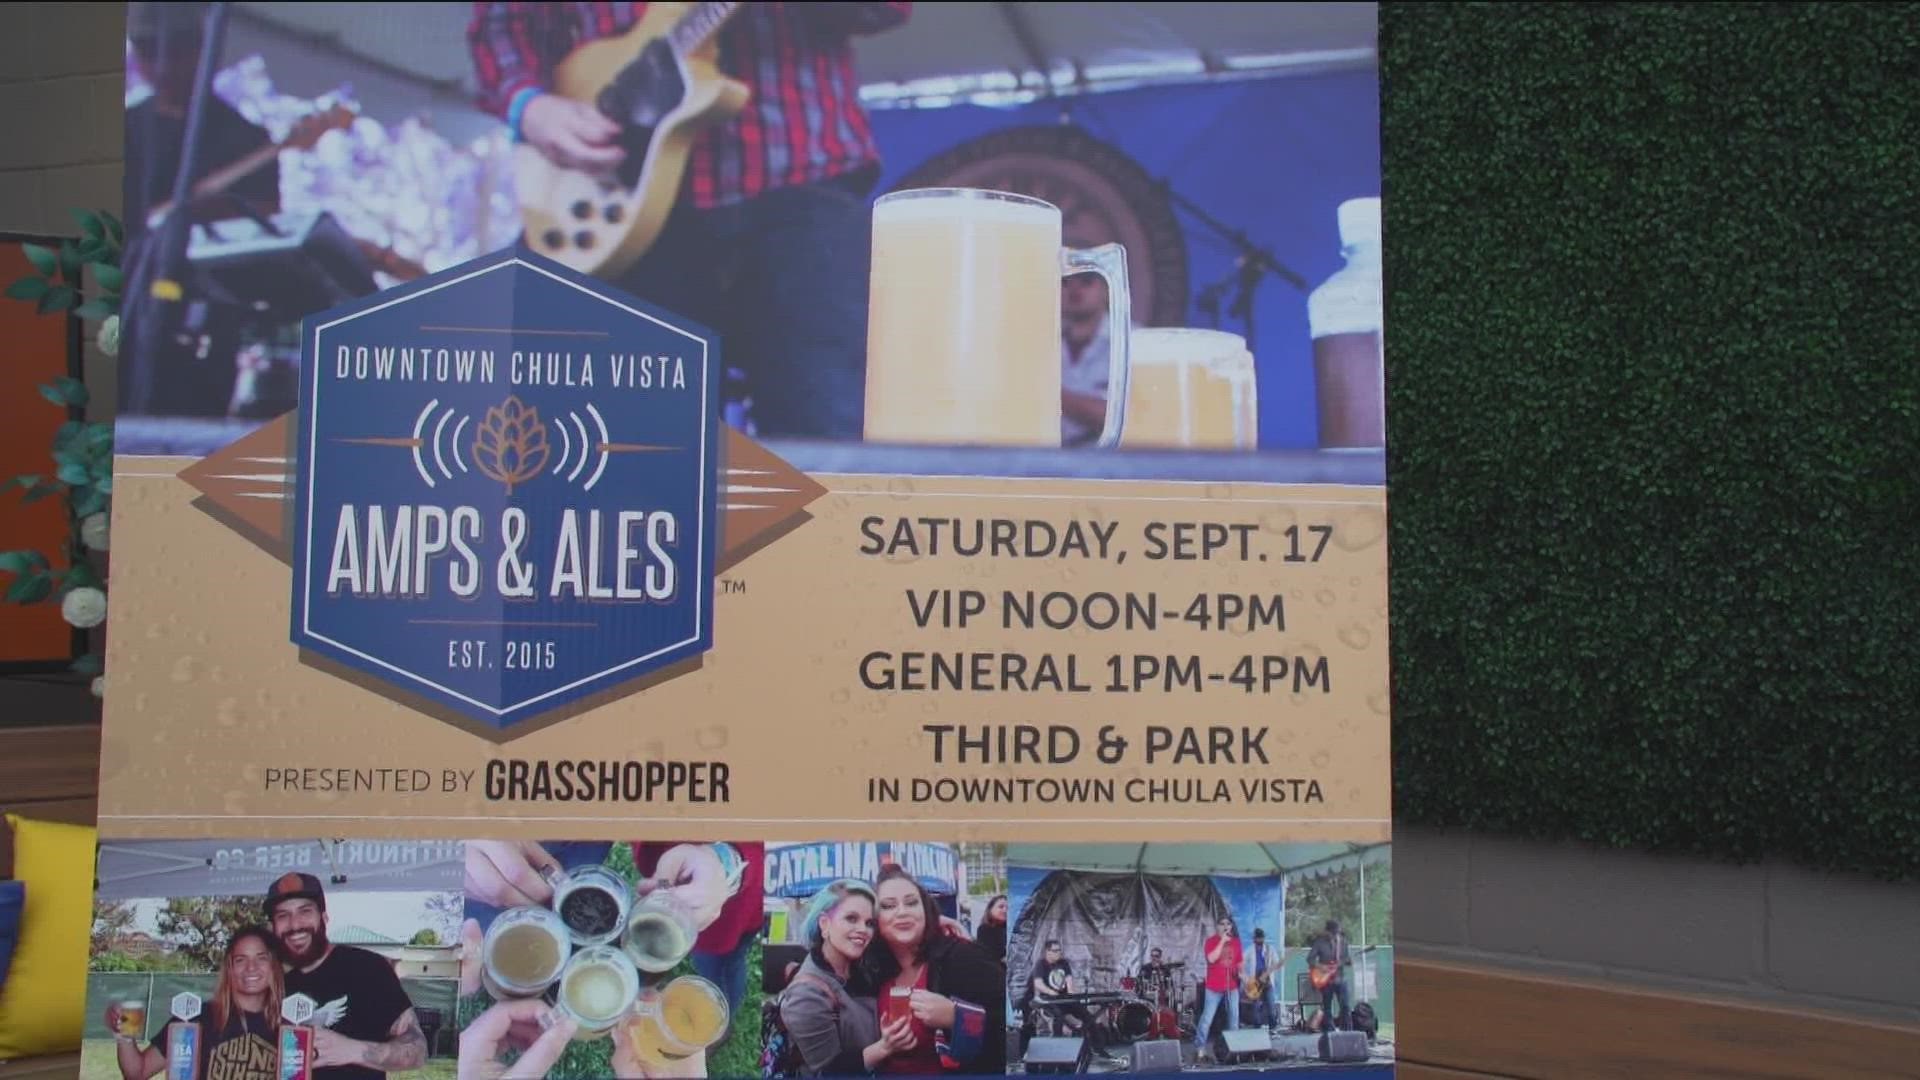 This Saturday, brews and bites collide during Amps & Ales in Downtown Chula Vista presented by Grasshopper.